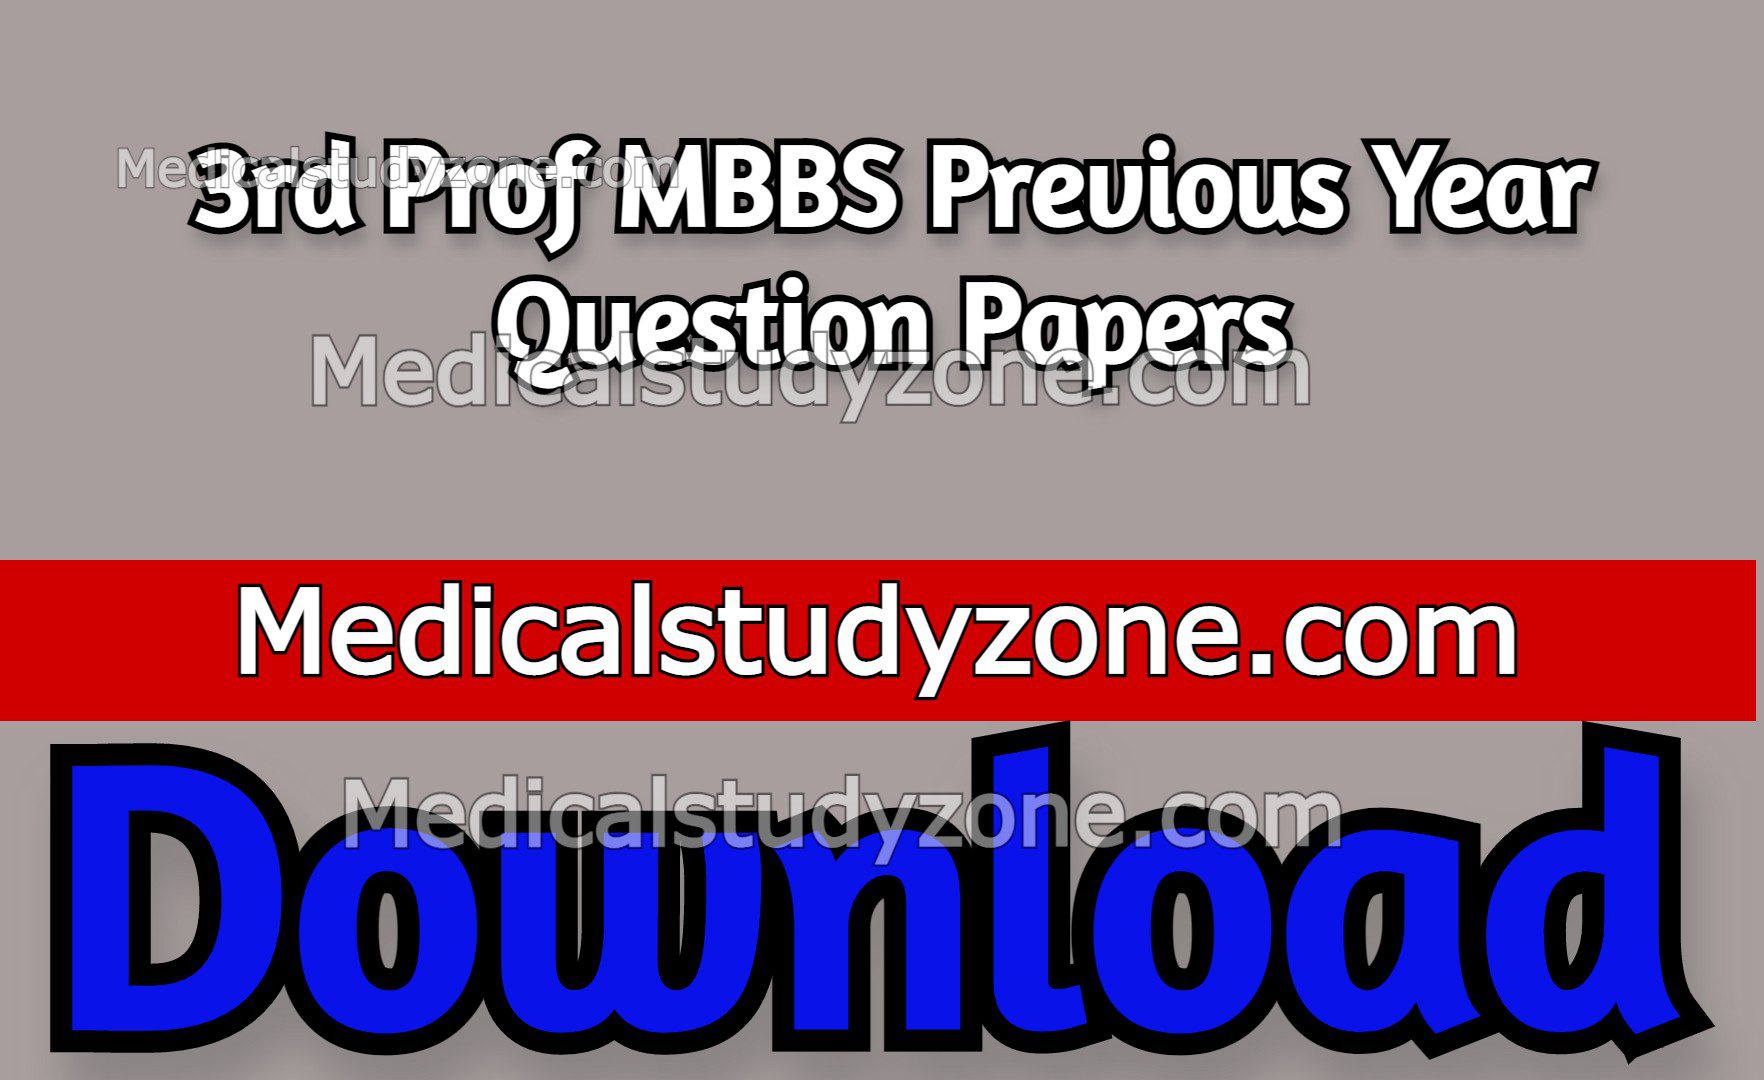 3rd Prof MBBS Previous Year Question Papers PDF Free Download